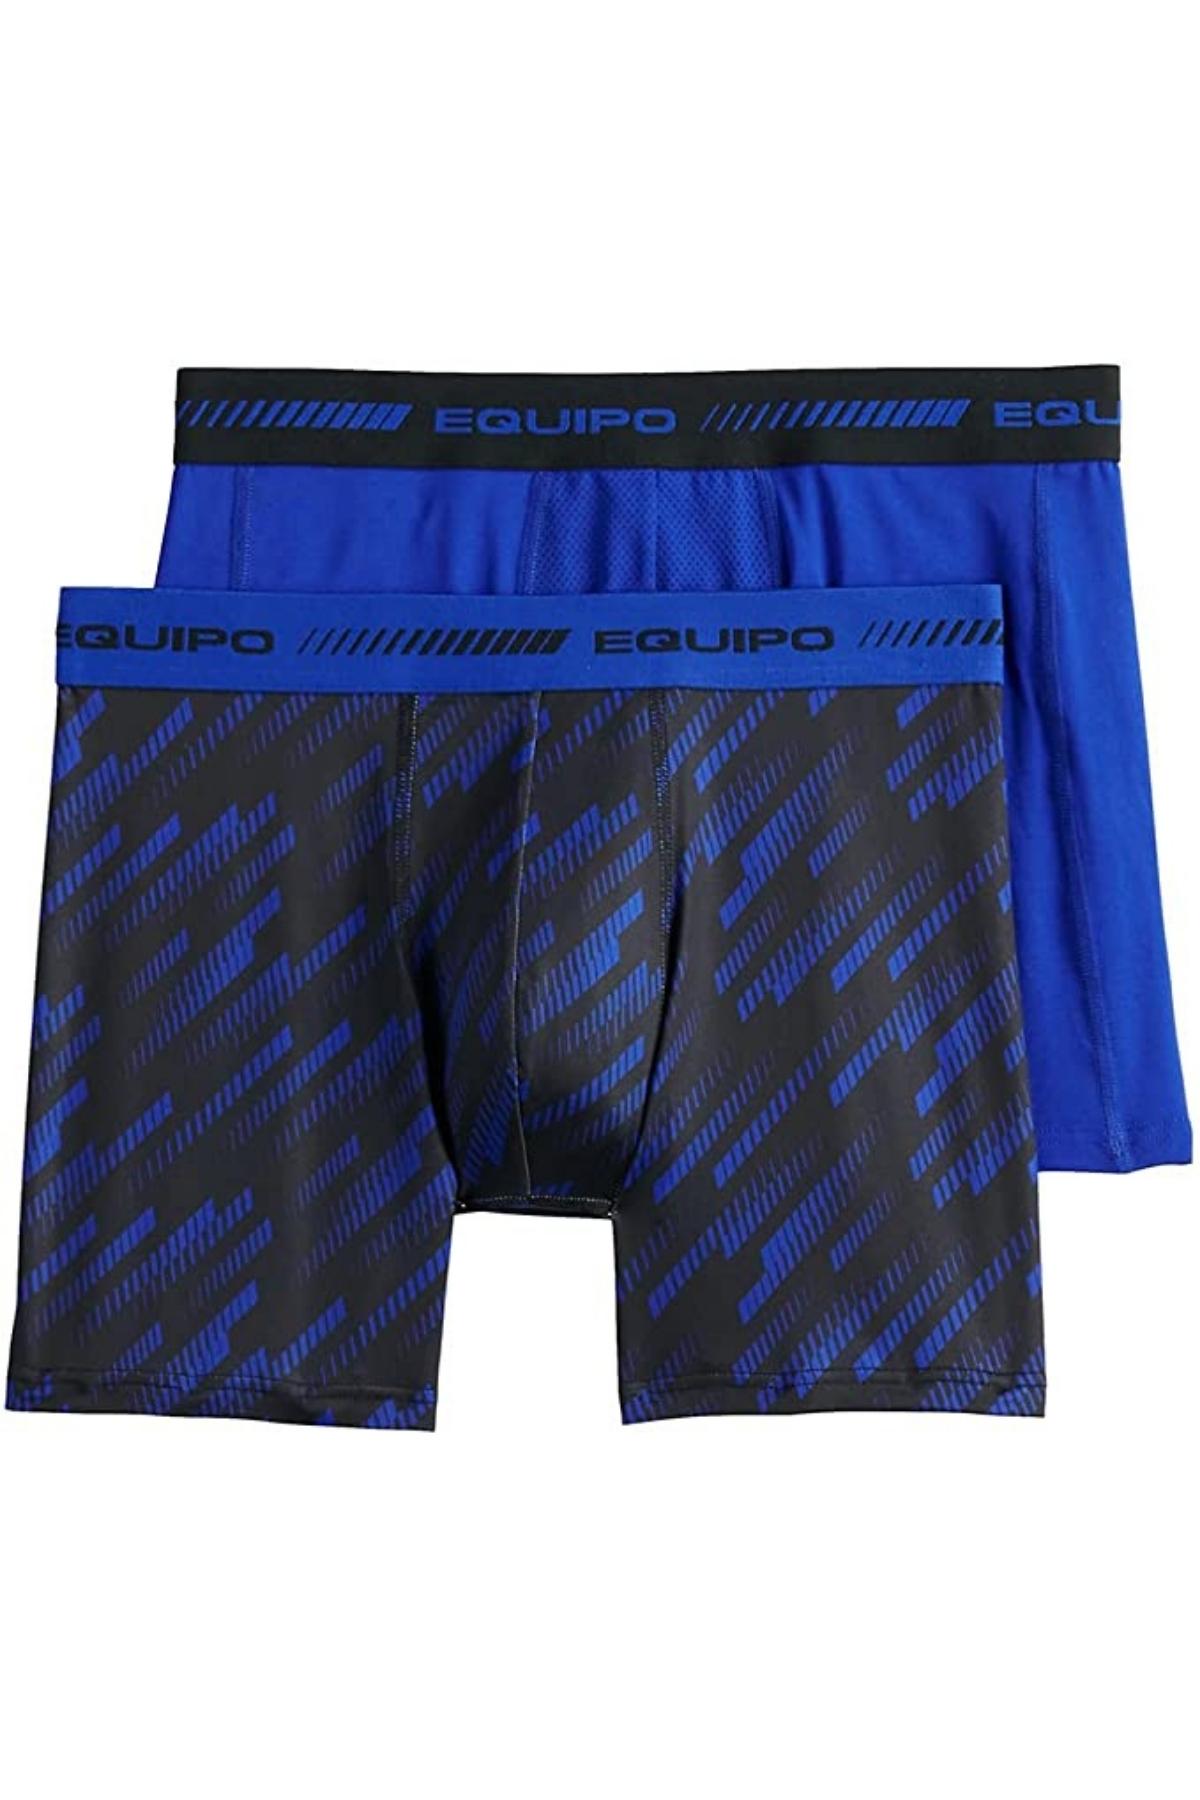 Equipo Blue and Diagonal Lines Quick Dry Performace 2-Pack Boxer Brief –  CheapUndies